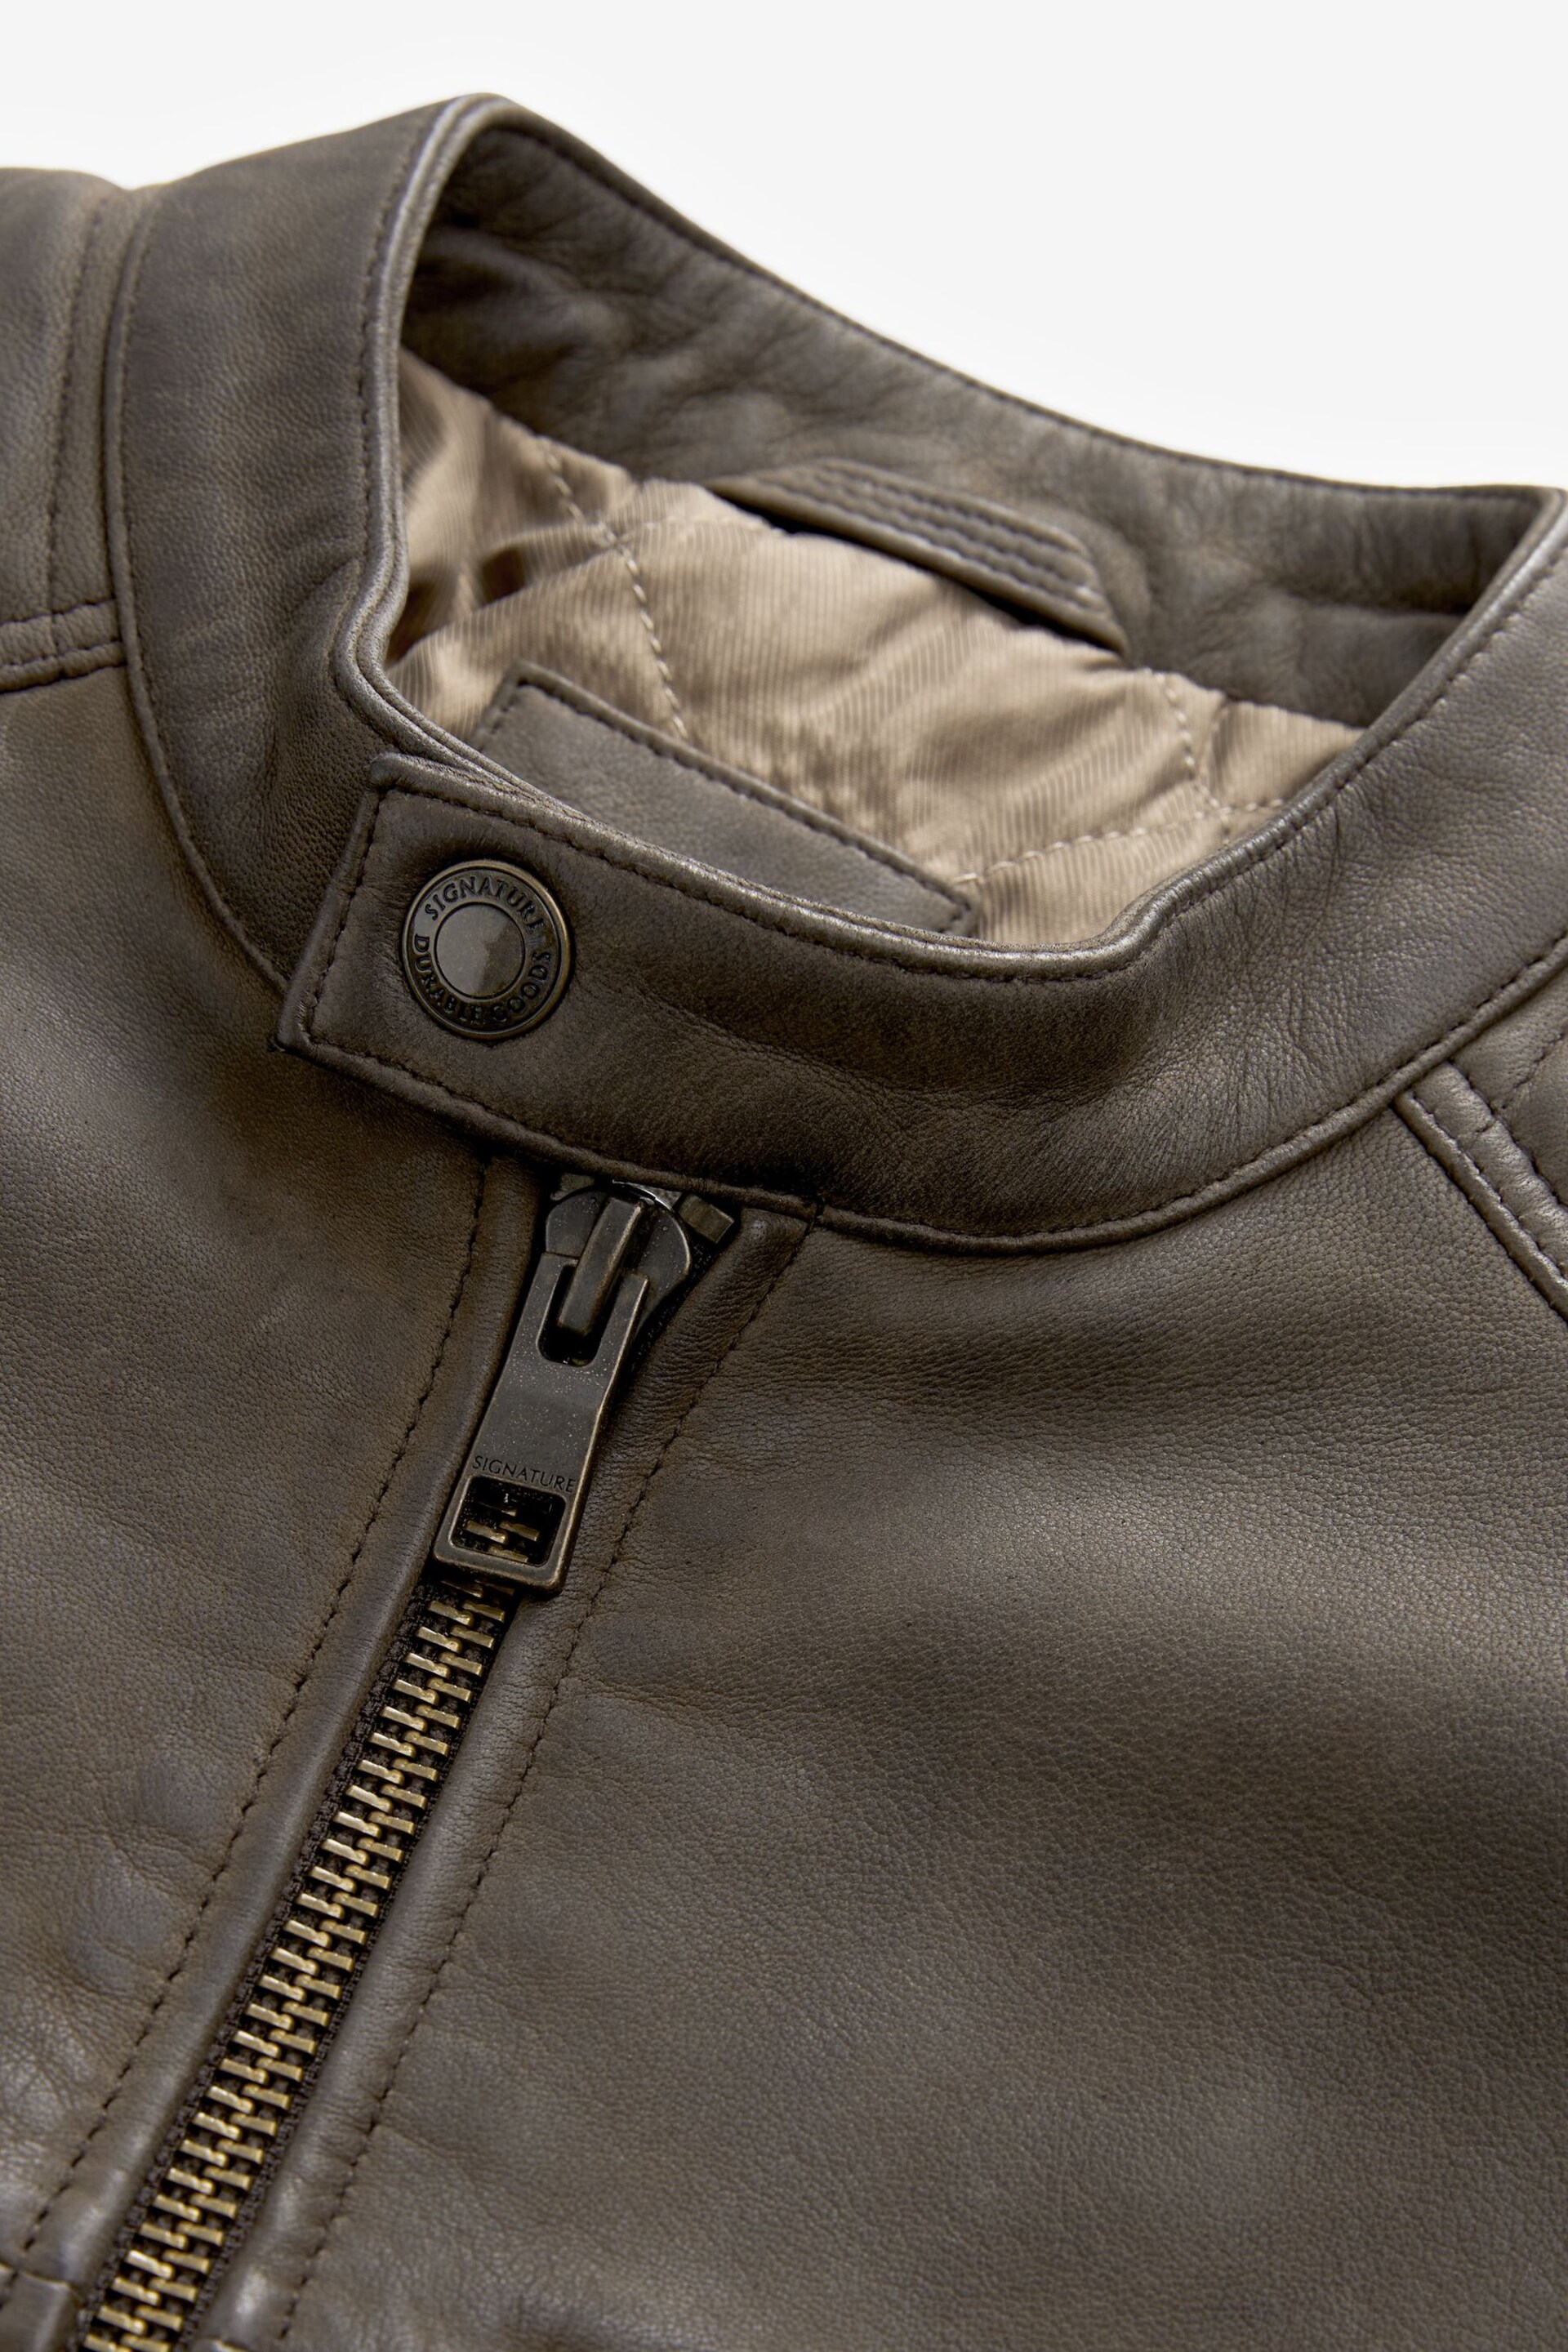 Brown Leather Quilted Racer Jacket - Image 8 of 10